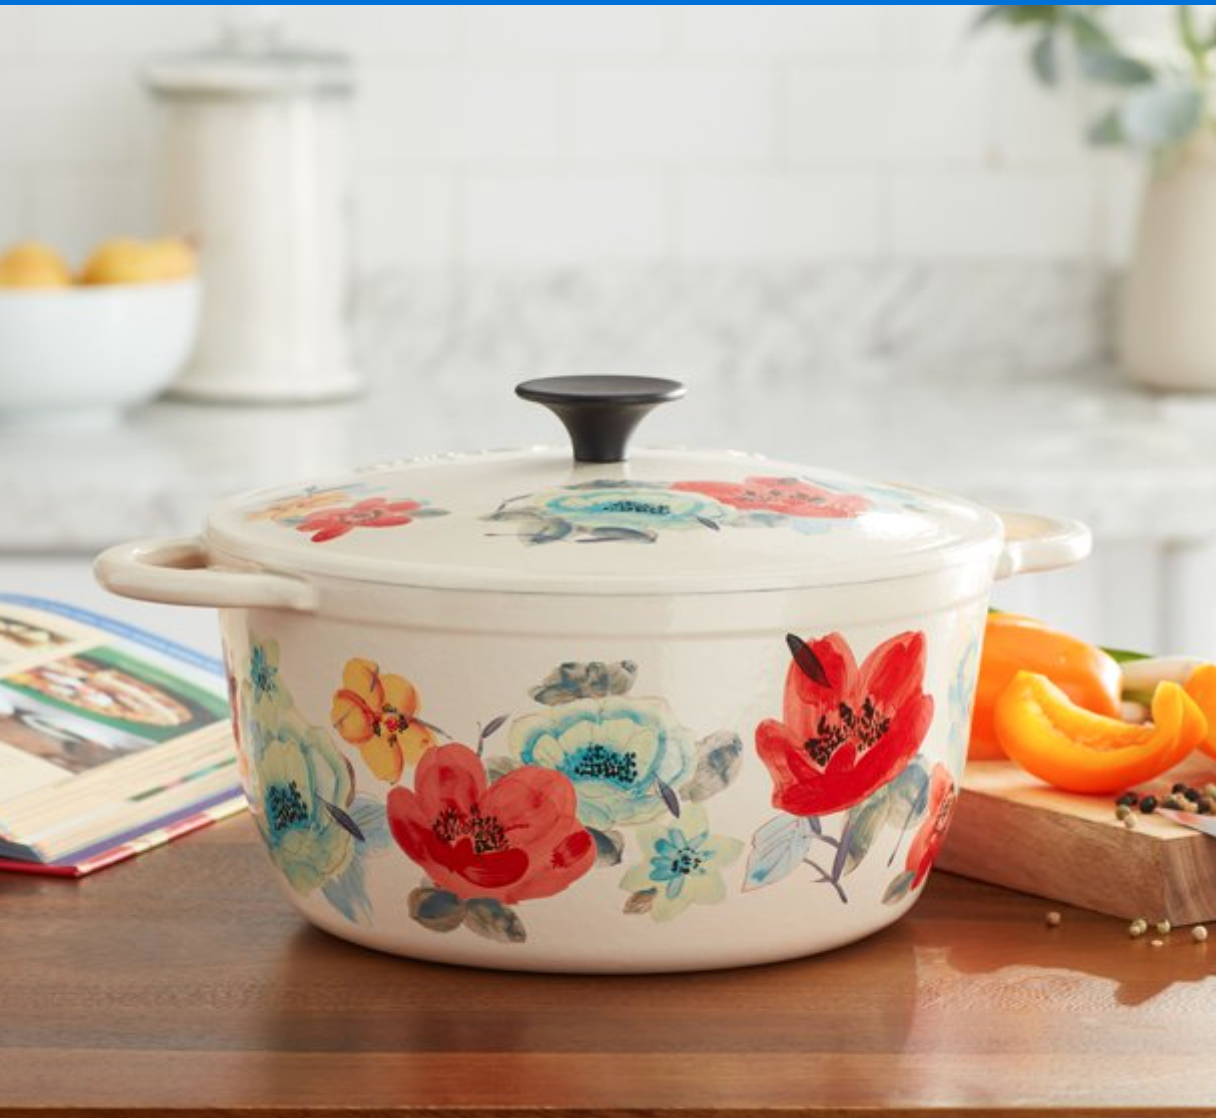 The Pioneer Woman Cheerful Rose 4-Quart Dutch Oven